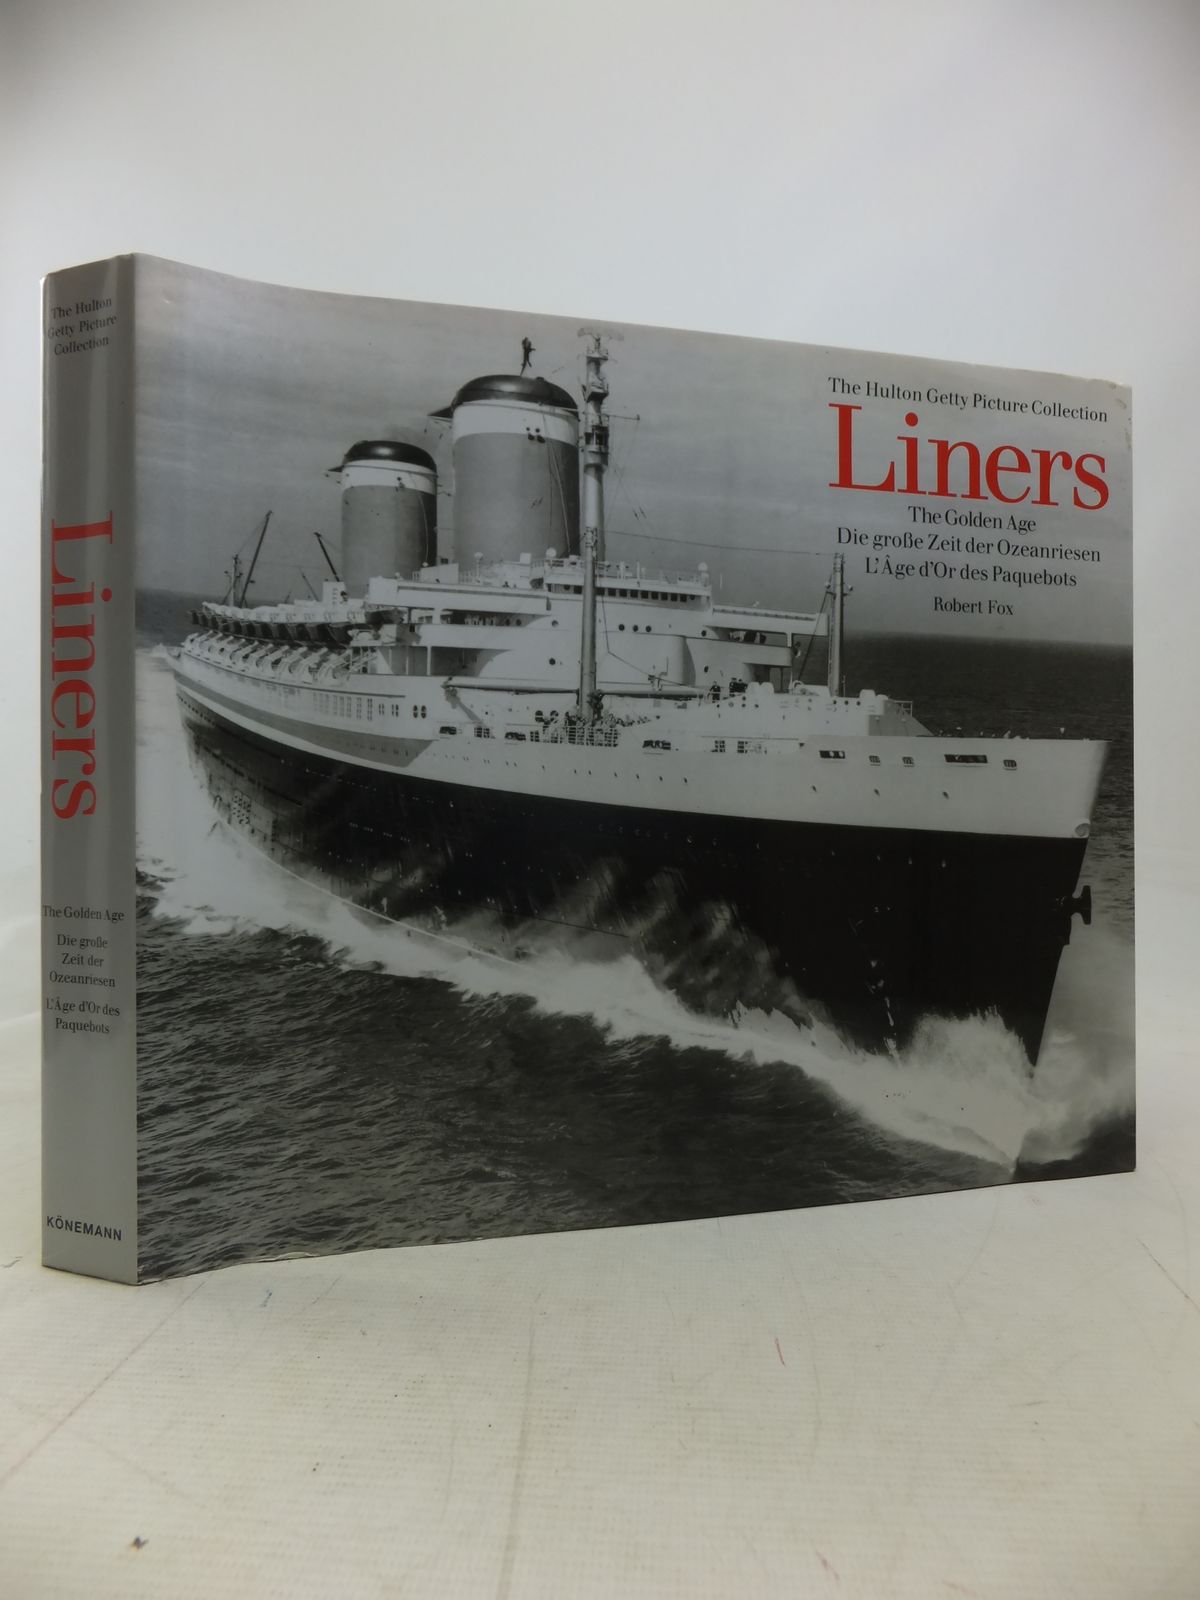 Stella & Rose's Books : LINERS THE GOLDEN AGE Written By Robert